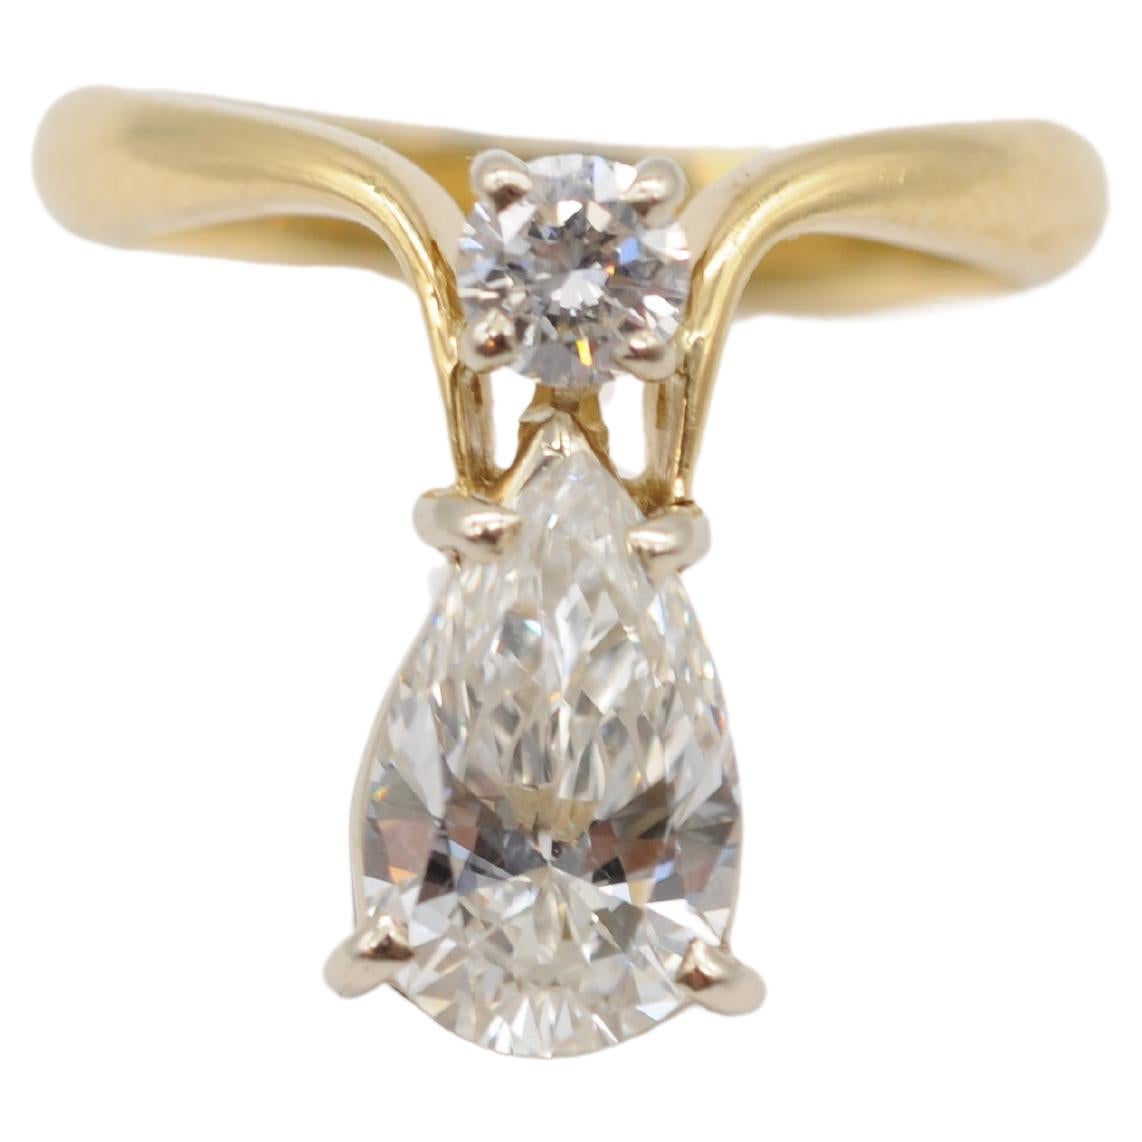 Majestic pear cut diamond engagement ring "Vs1" approx 1.25ct in 18k gold For Sale